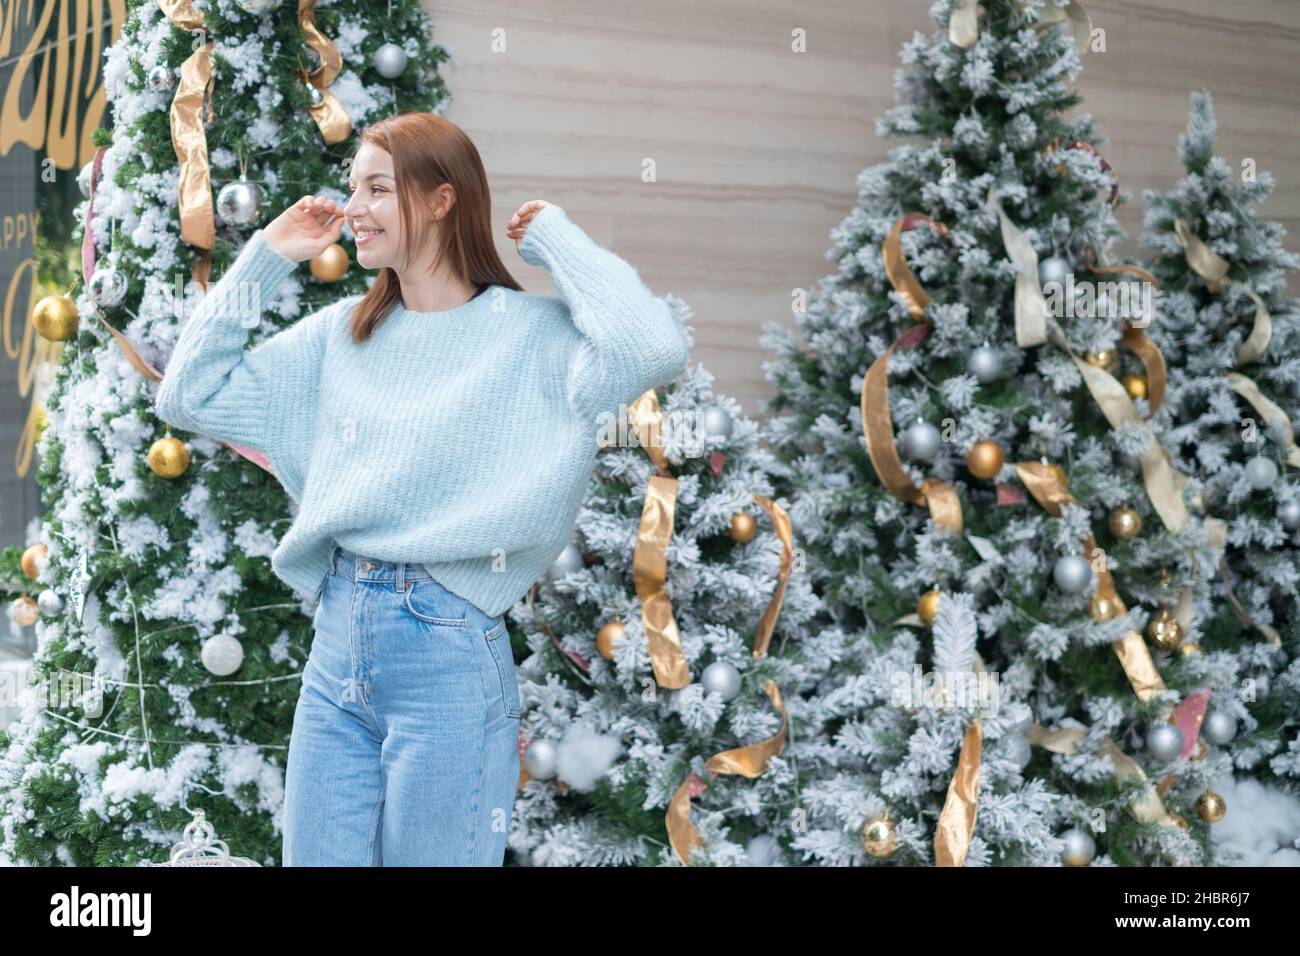 https://c8.alamy.com/comp/2HBR6J7/new-year-portrait-of-beautiful-smiling-caucasian-young-woman-in-cozy-wool-warm-light-blue-sweater-standing-near-decorated-christmas-tree-happy-person-2HBR6J7.jpg